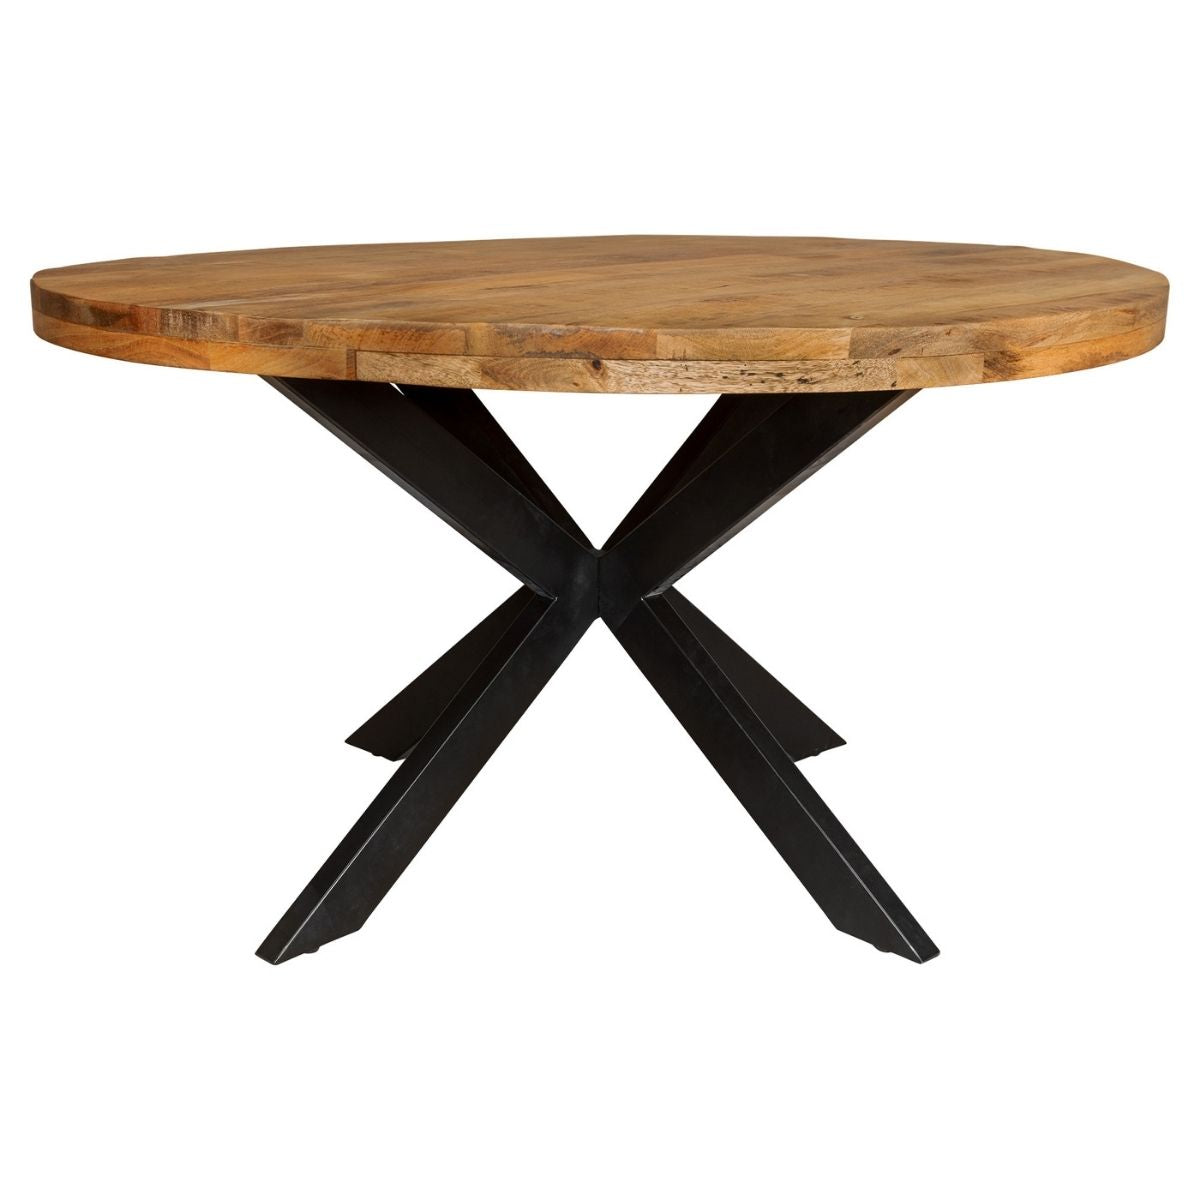 Dining room table Natural | Denver | round | Mango wood | 76(h) x